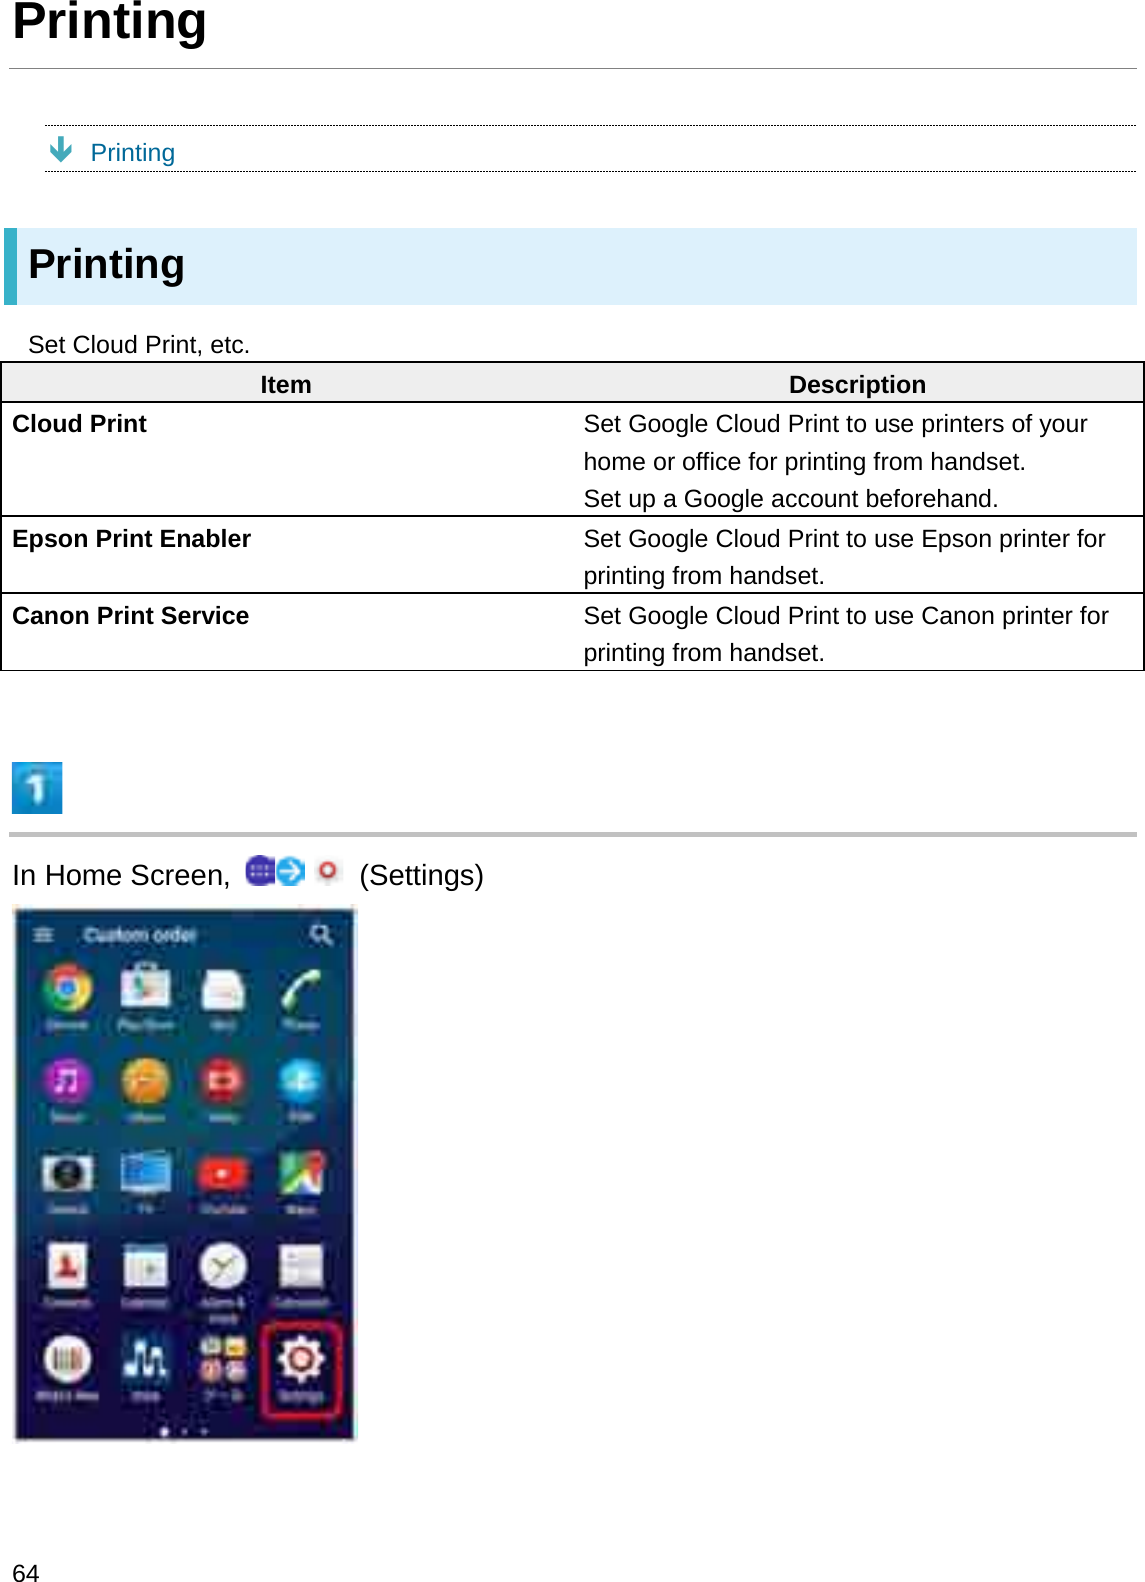 PrintingÐPrintingPrintingSet Cloud Print, etc.Item DescriptionCloud Print Set Google Cloud Print to use printers of yourhome or office for printing from handset.Set up a Google account beforehand.Epson Print Enabler Set Google Cloud Print to use Epson printer for printing from handset.Canon Print Service Set Google Cloud Print to use Canon printer for printing from handset.In Home Screen,  (Settings)64